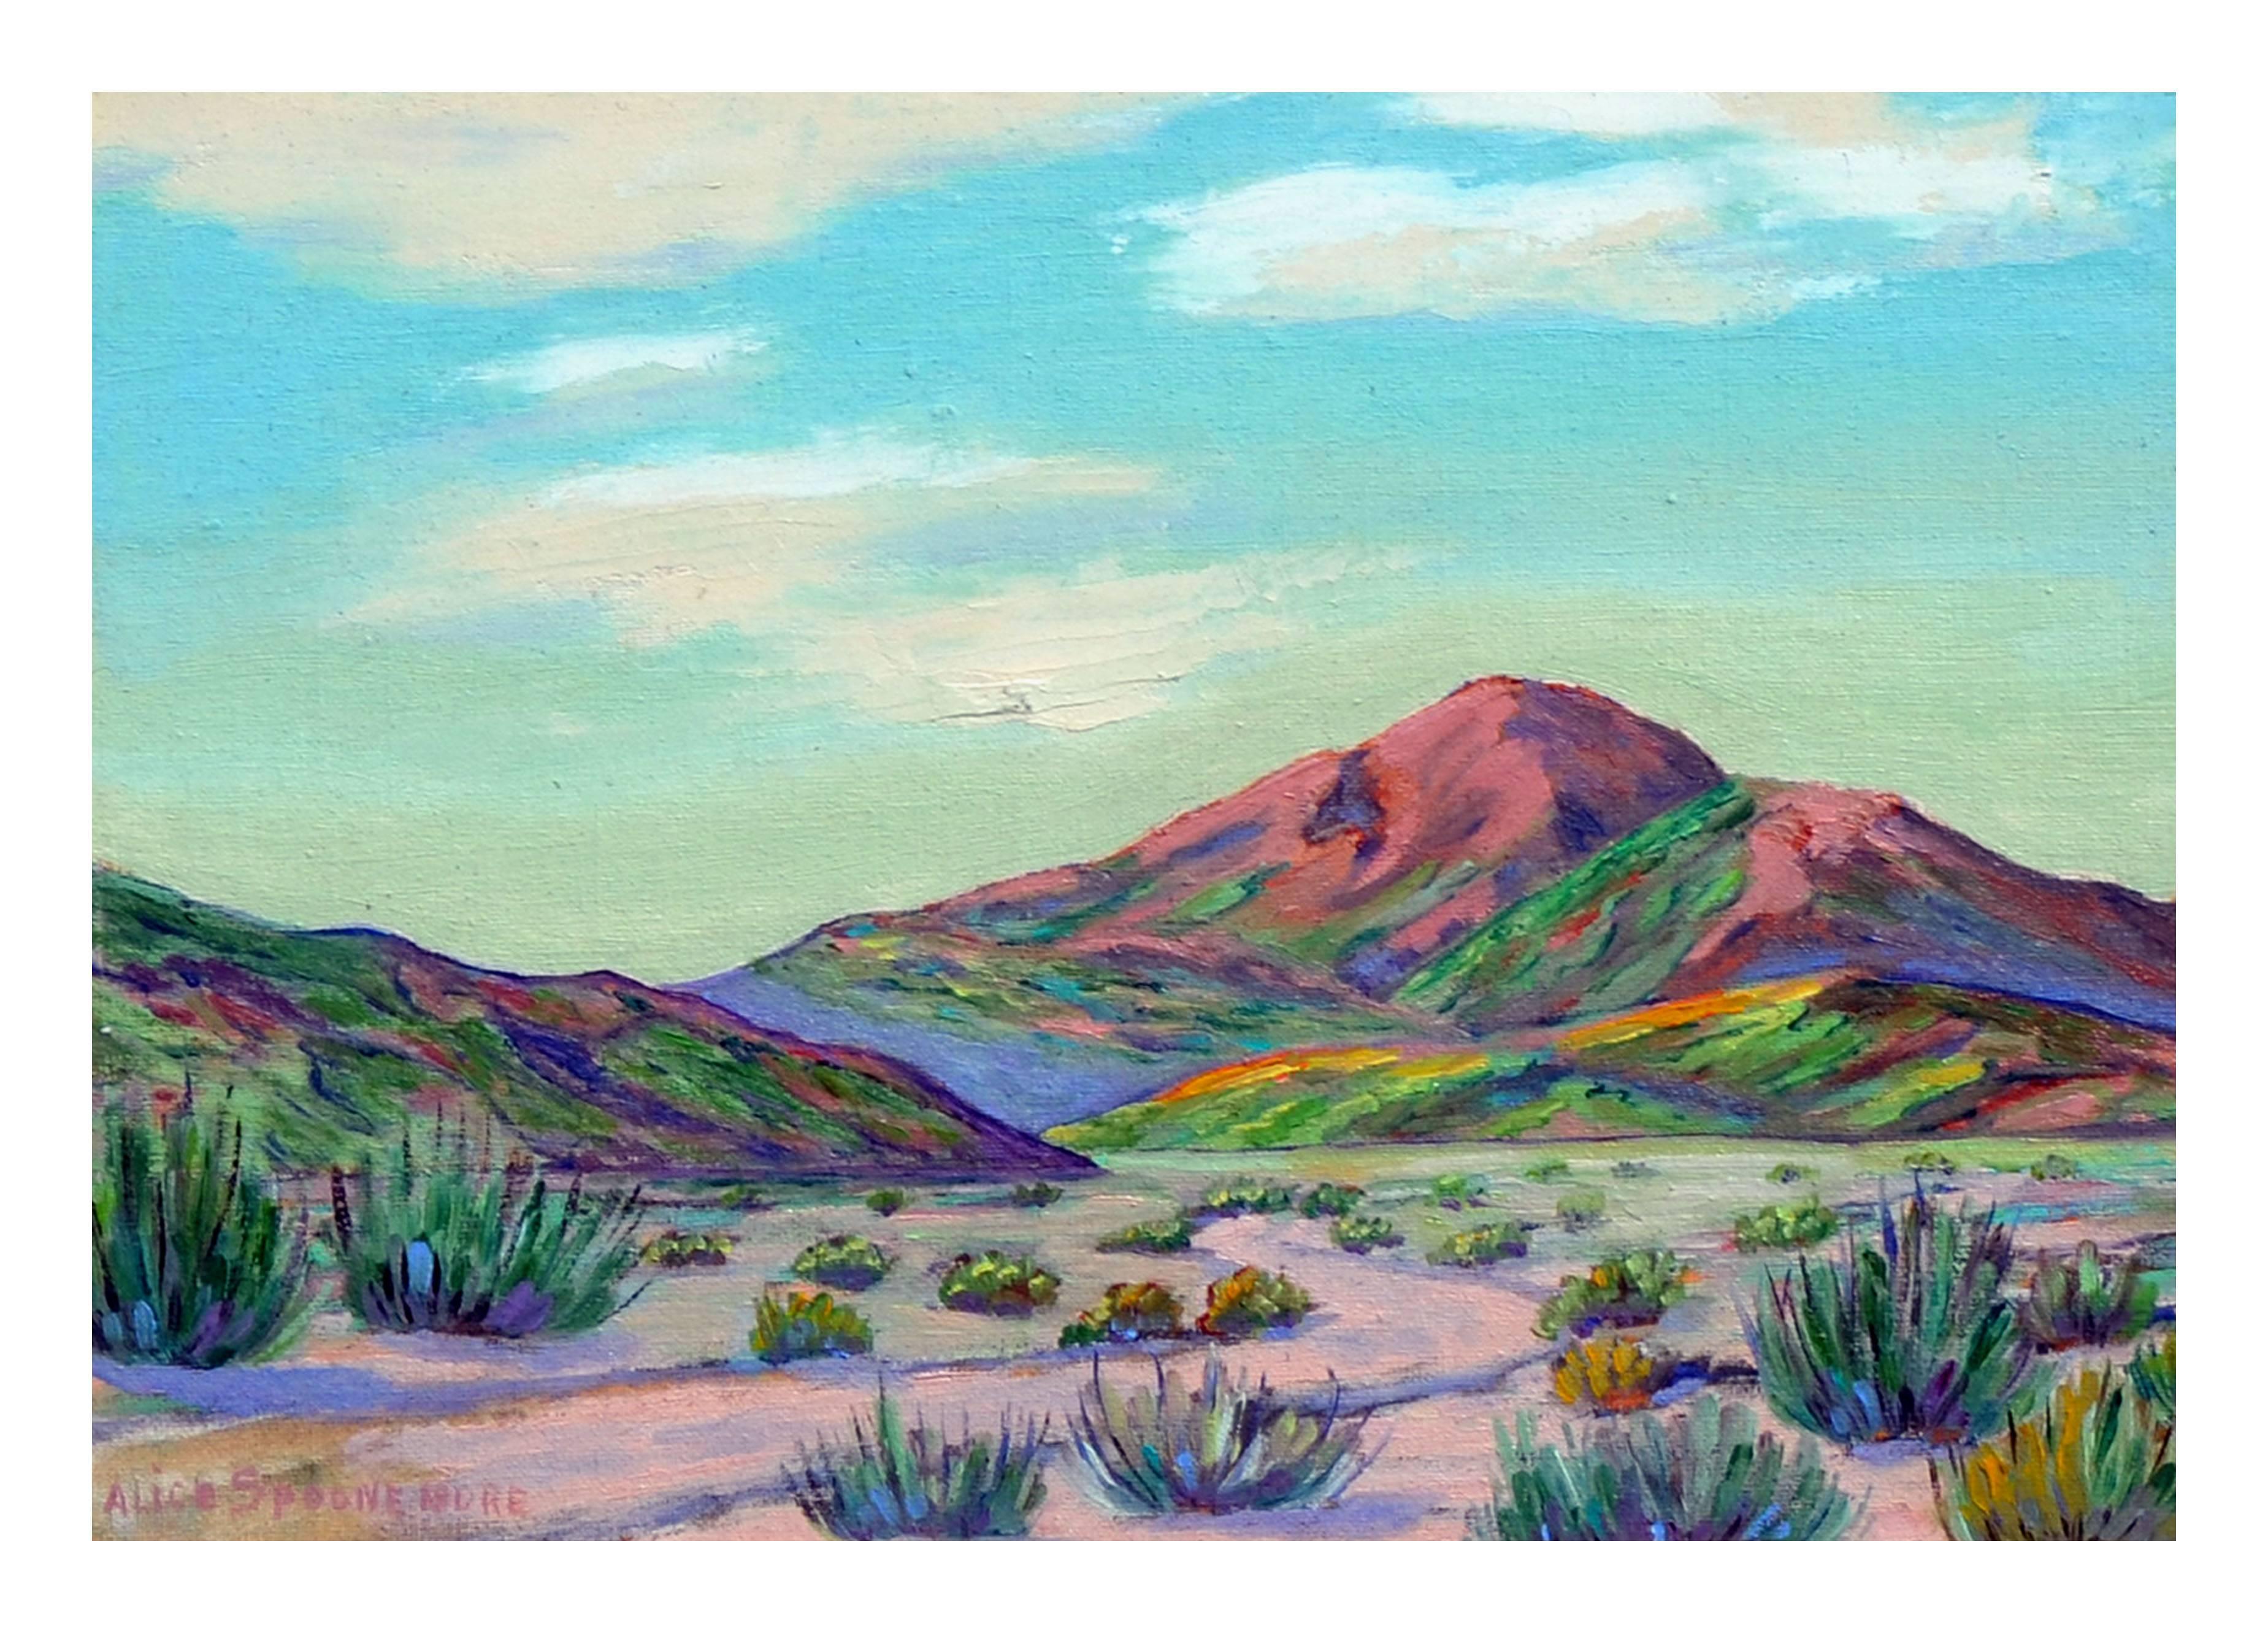 Desert Mountains - Painting by Alice Spoonemore